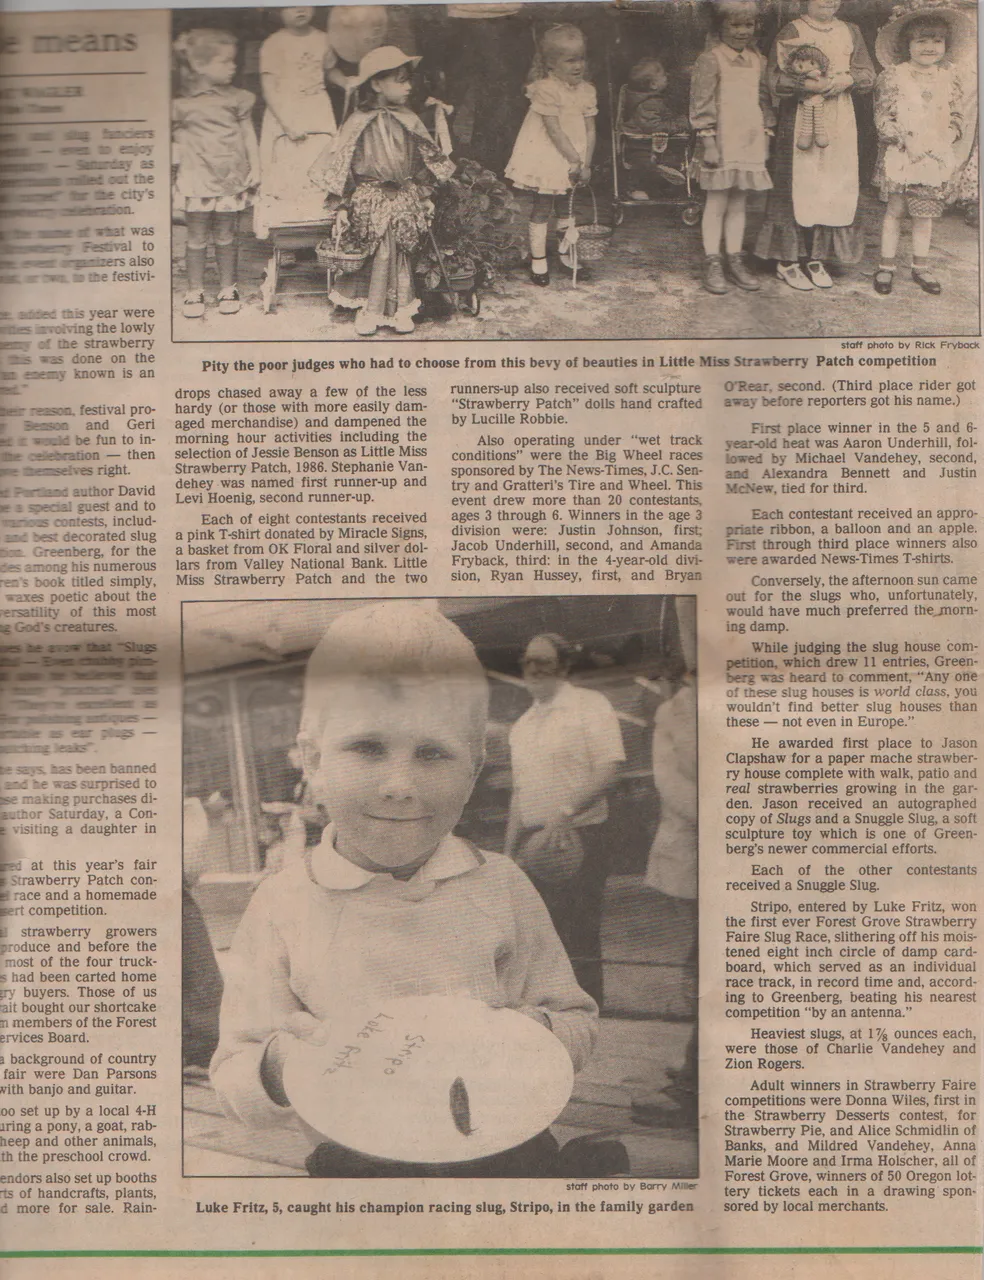 1986-06-14 - Saturday - 3rd annual Strawberry Faire or Festival featuring Little Miss Strawberry Patch competition which Katie was in-4.png